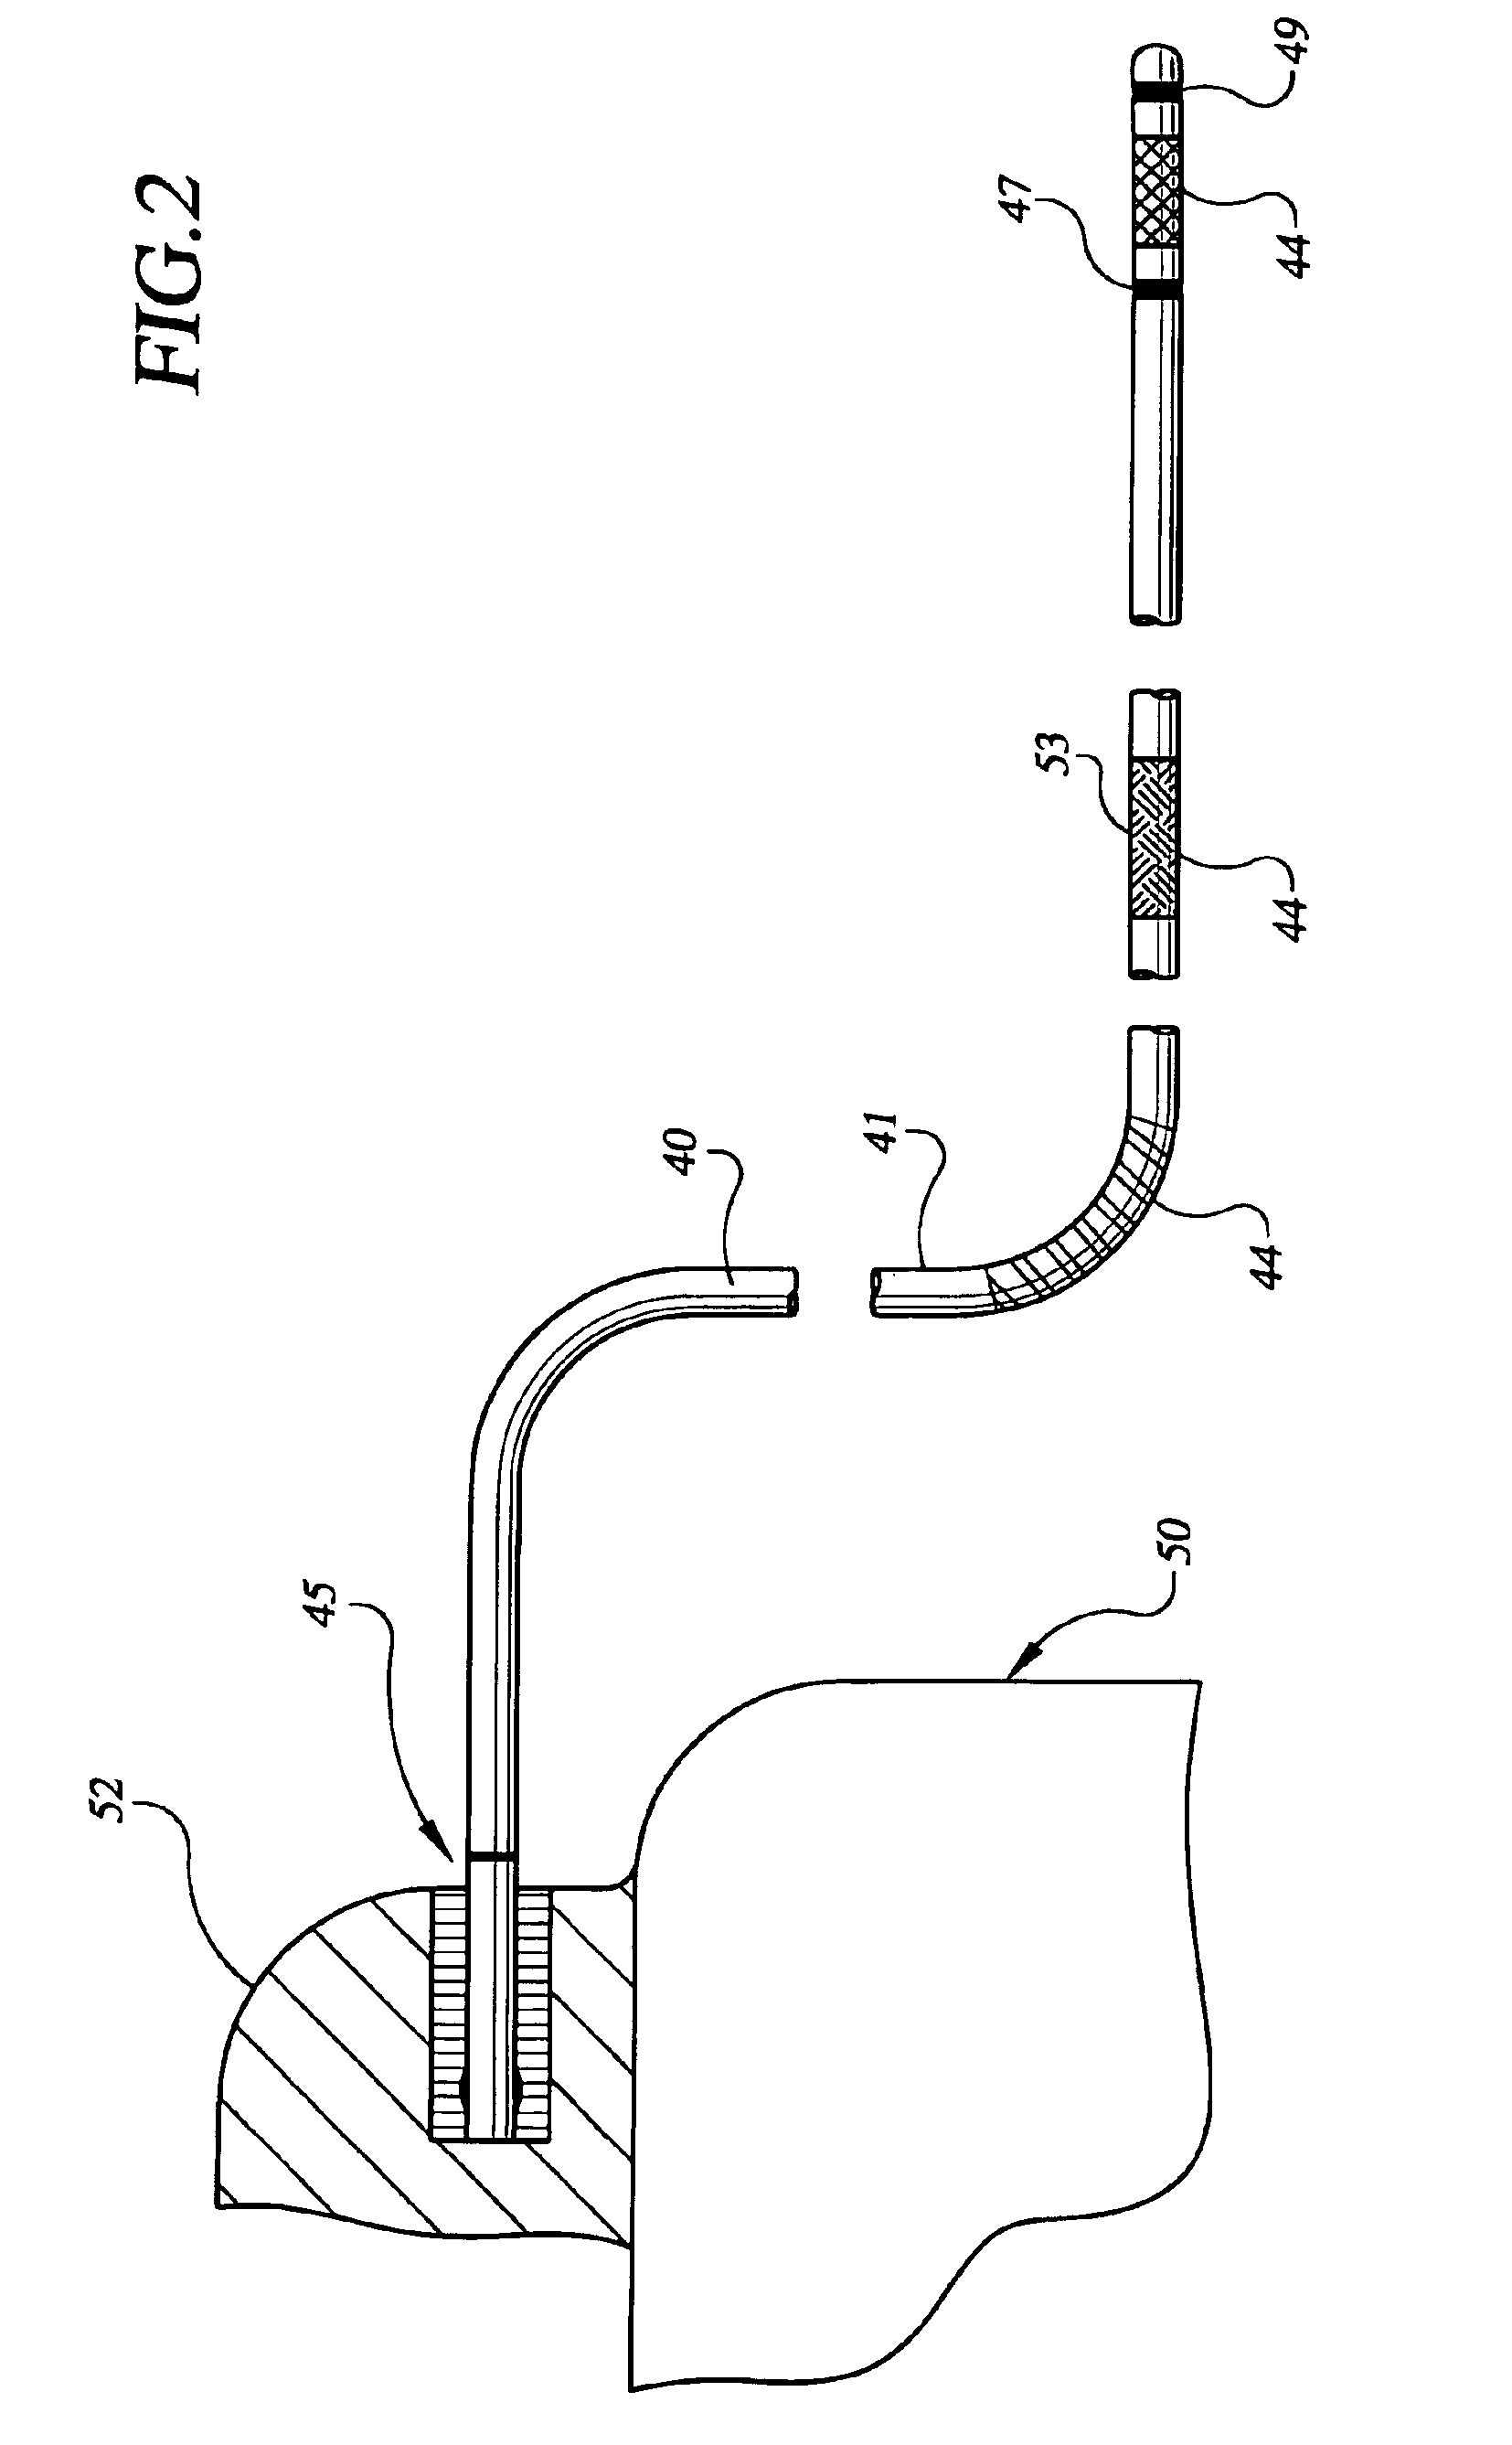 Apparatus and method for stabilizing an implantable lead